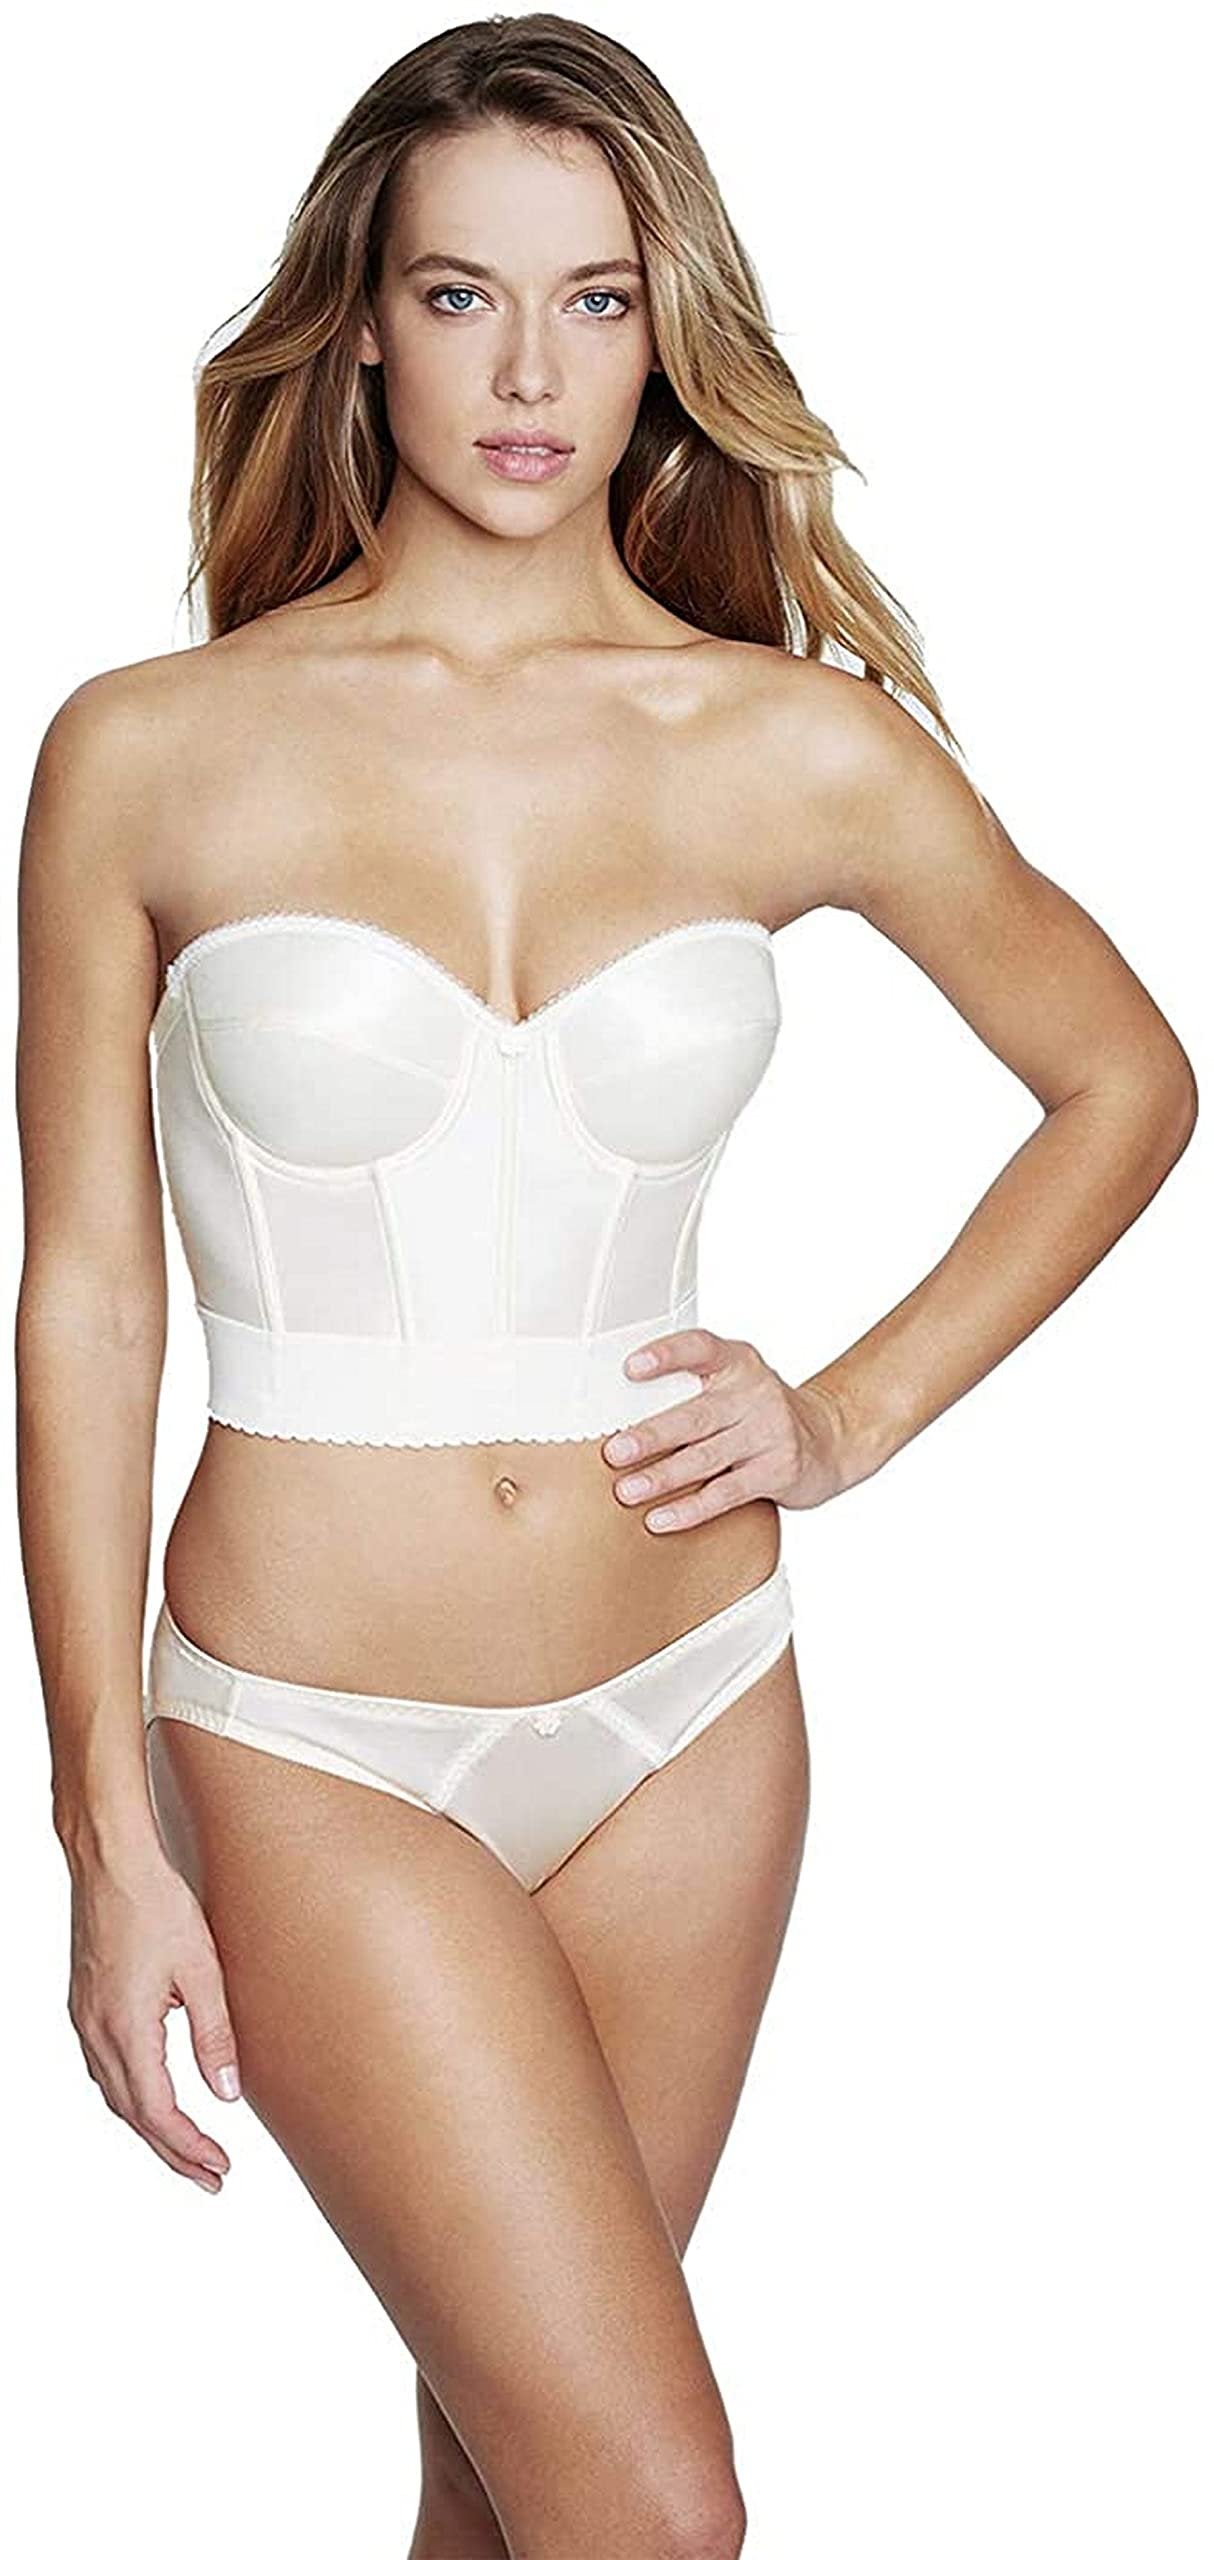 New Dominique Noemi Strapless Backless Bra Ivory 42DD - Free Shipping